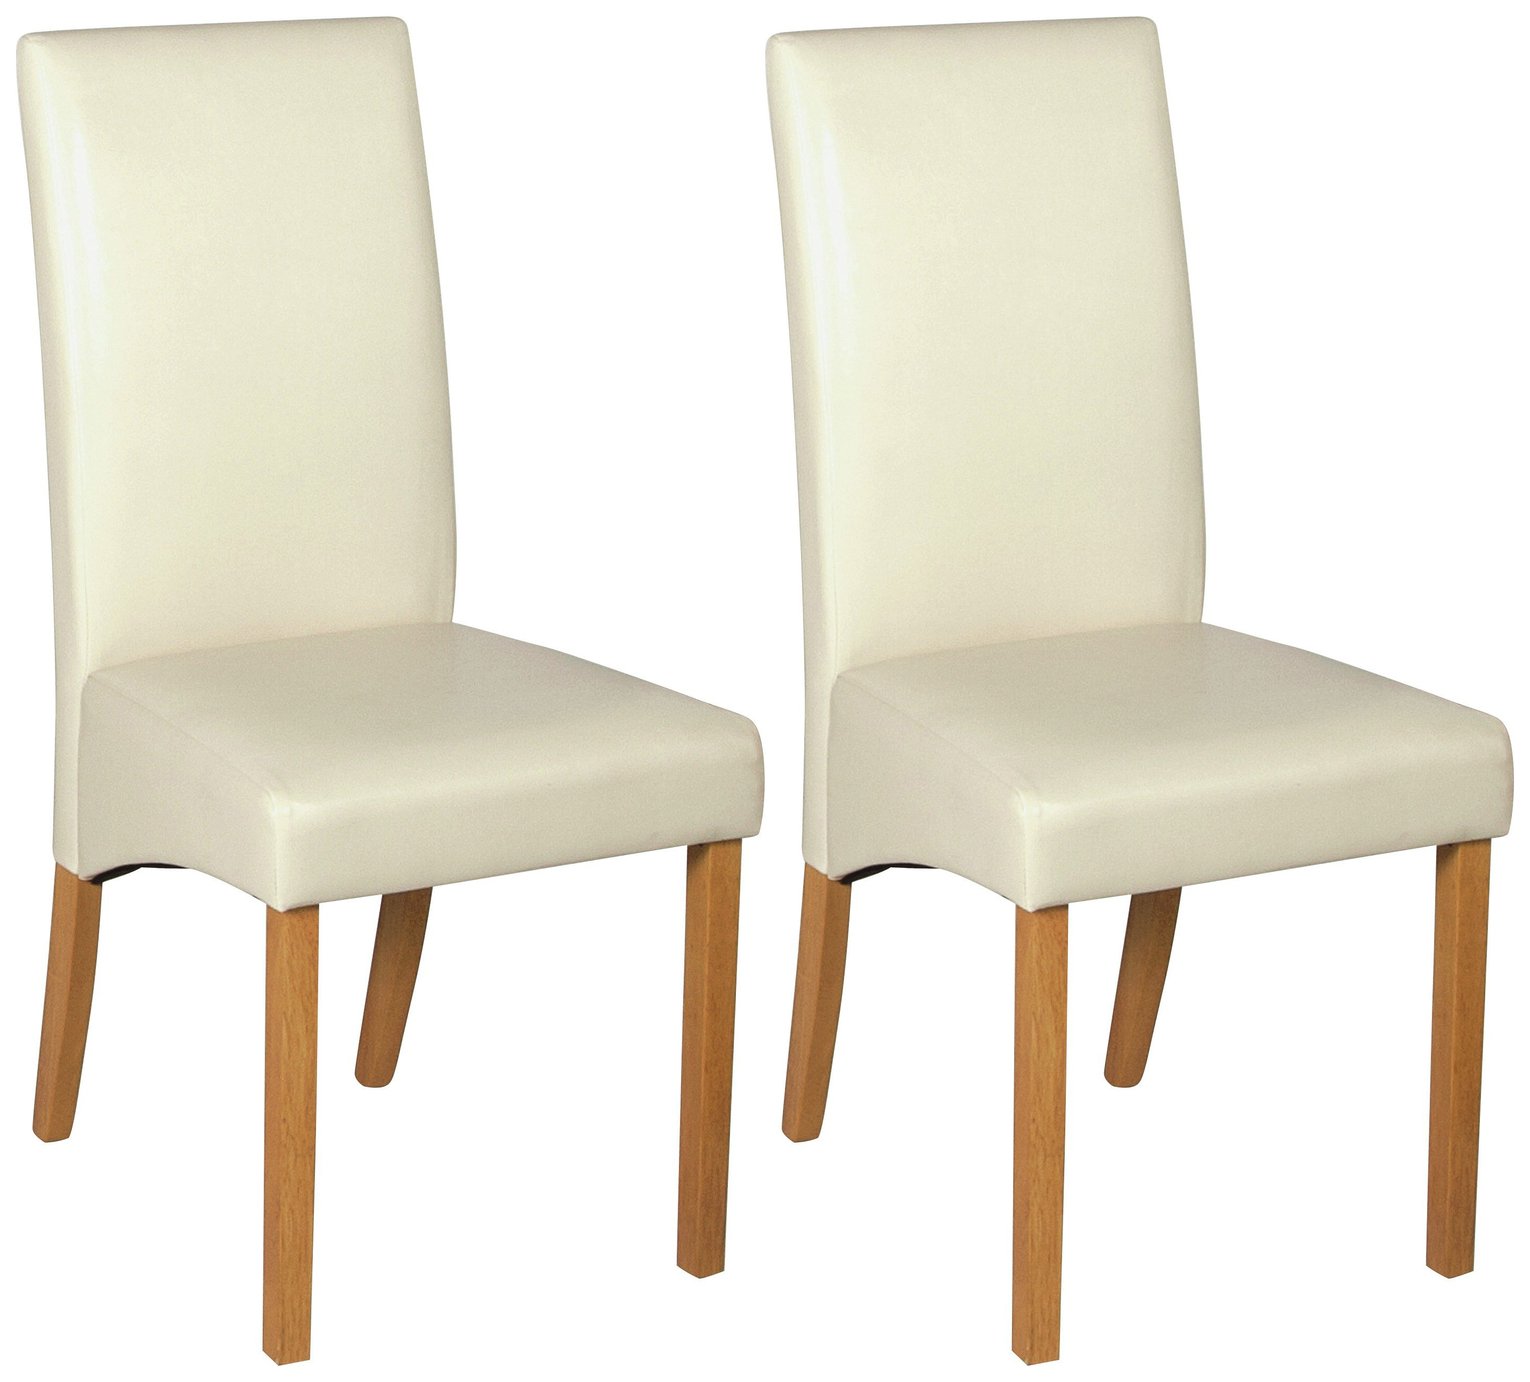 Dining chairs | Page 8 | Argos Price Tracker | pricehistory.co.uk